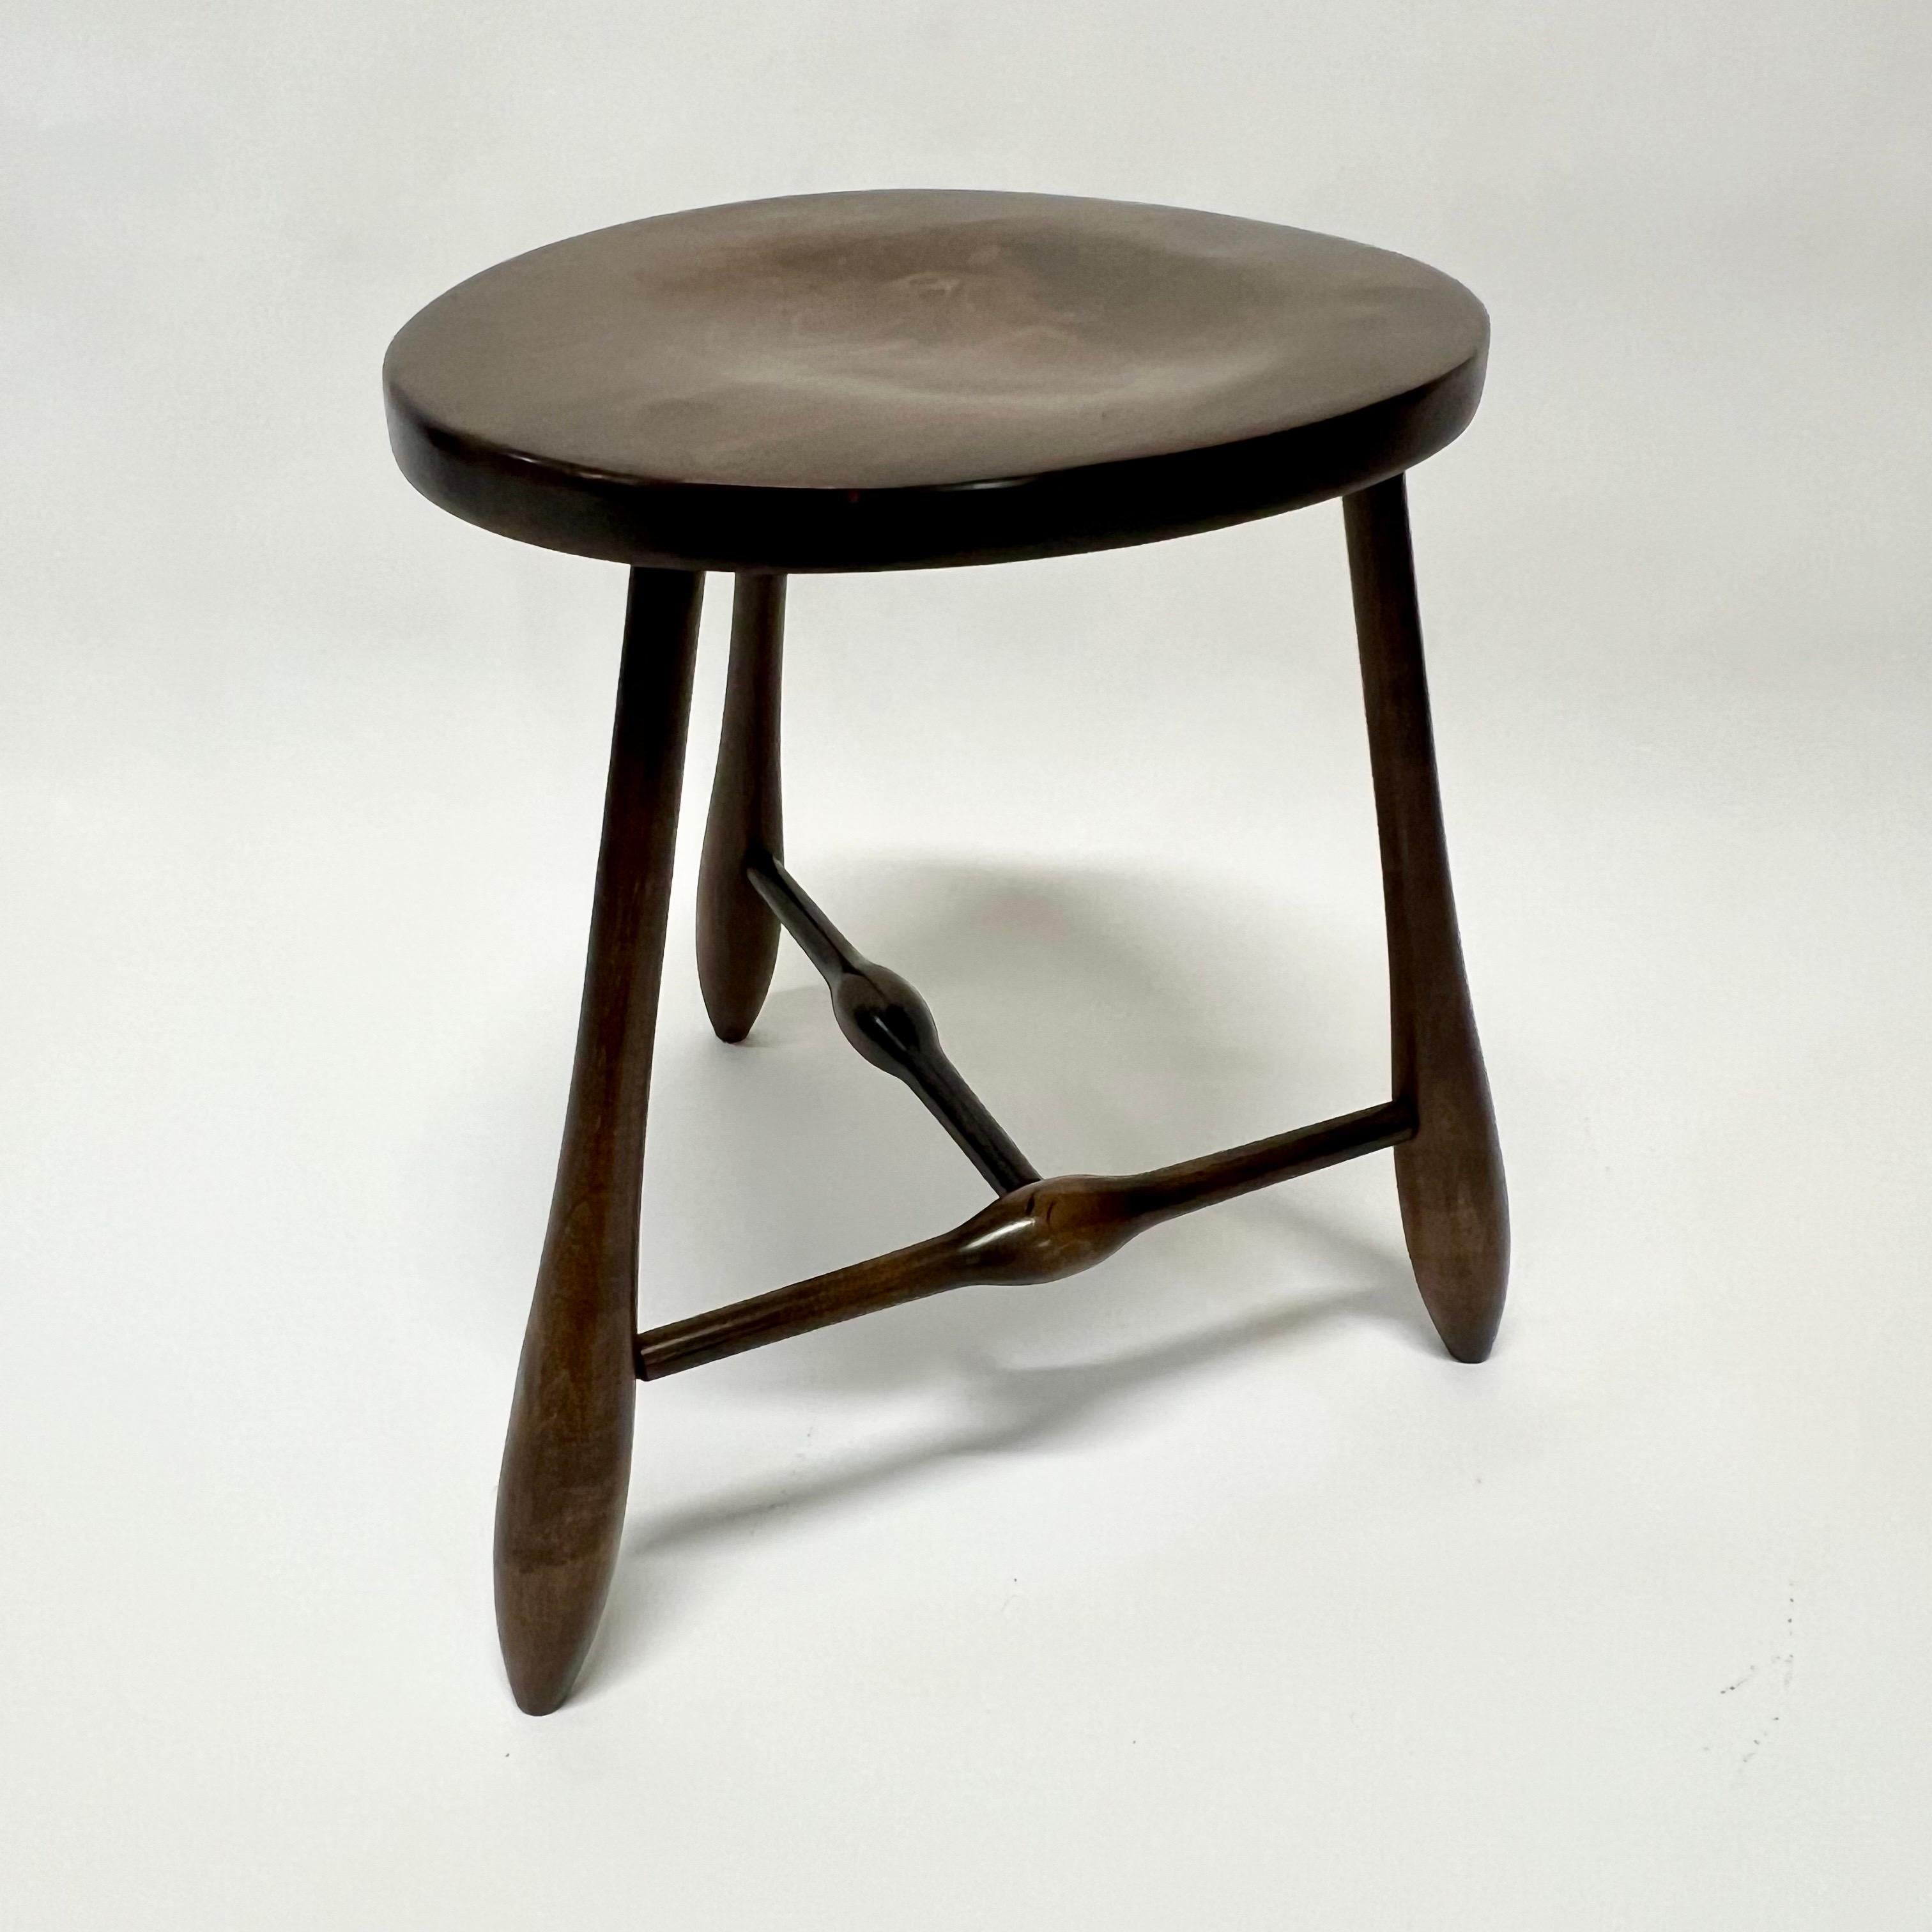 A tripod legged stool of solid walnut by the Hale Company of East Arlington, Vermont. Influenced by mid century Shaker furniture and stools by the master of American woodworkers, Wharton Esherick, of the 1950s. The club shaped legs are mortised and